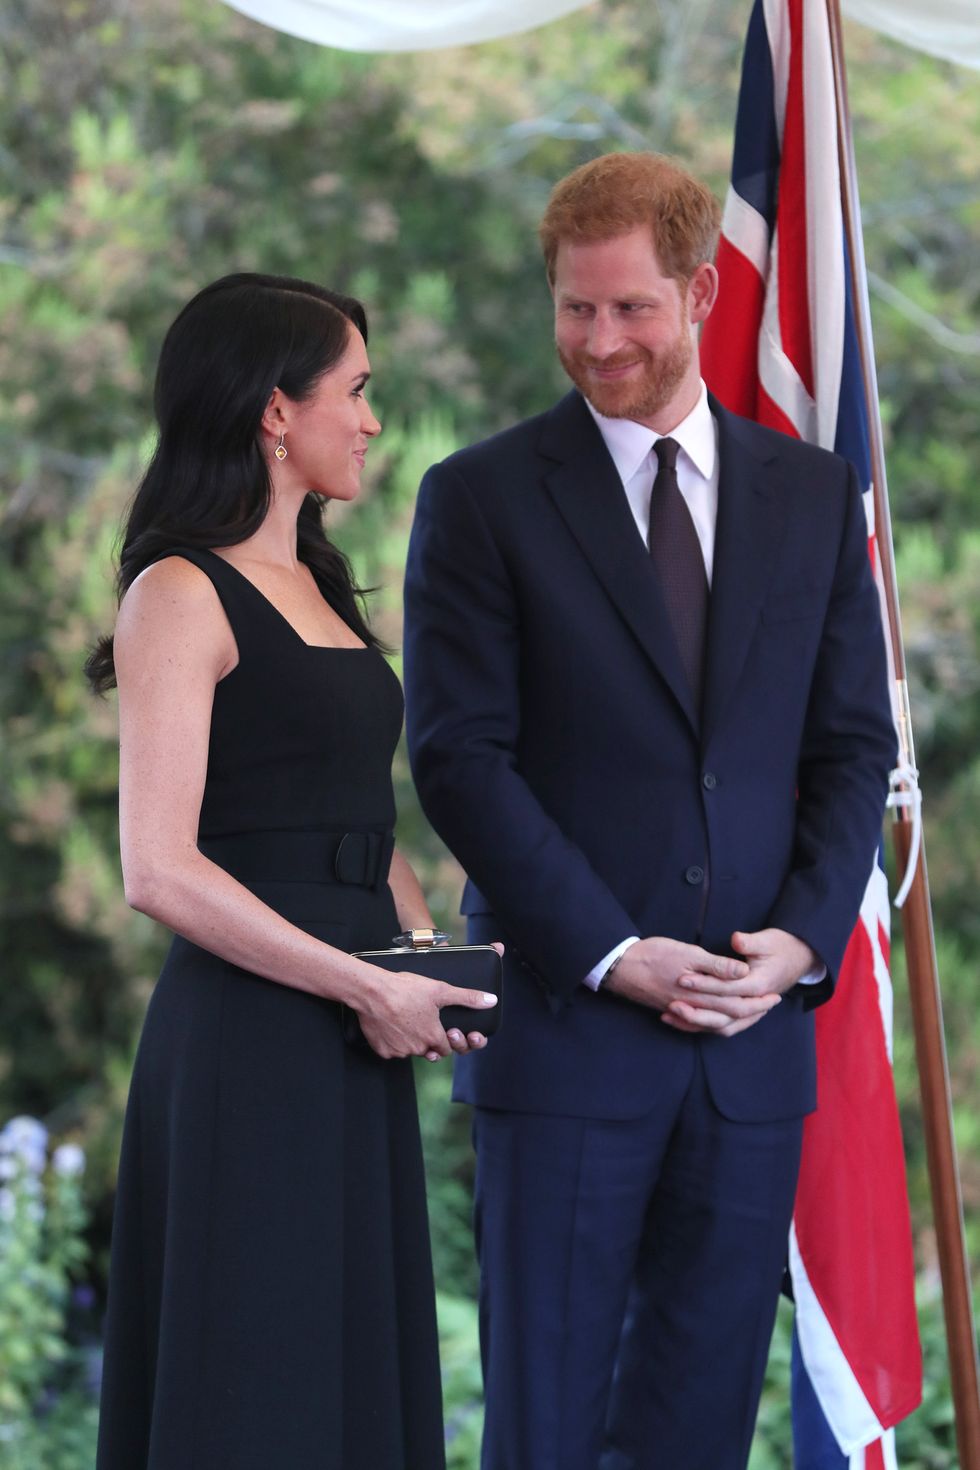 Prince Harry - Meghan Markle -  Duke and Duchess of Sussex - Discussion  - Page 23 Hbz-prince-harry-meghan-markle-ireland-gettyimages-995588332-1531258394